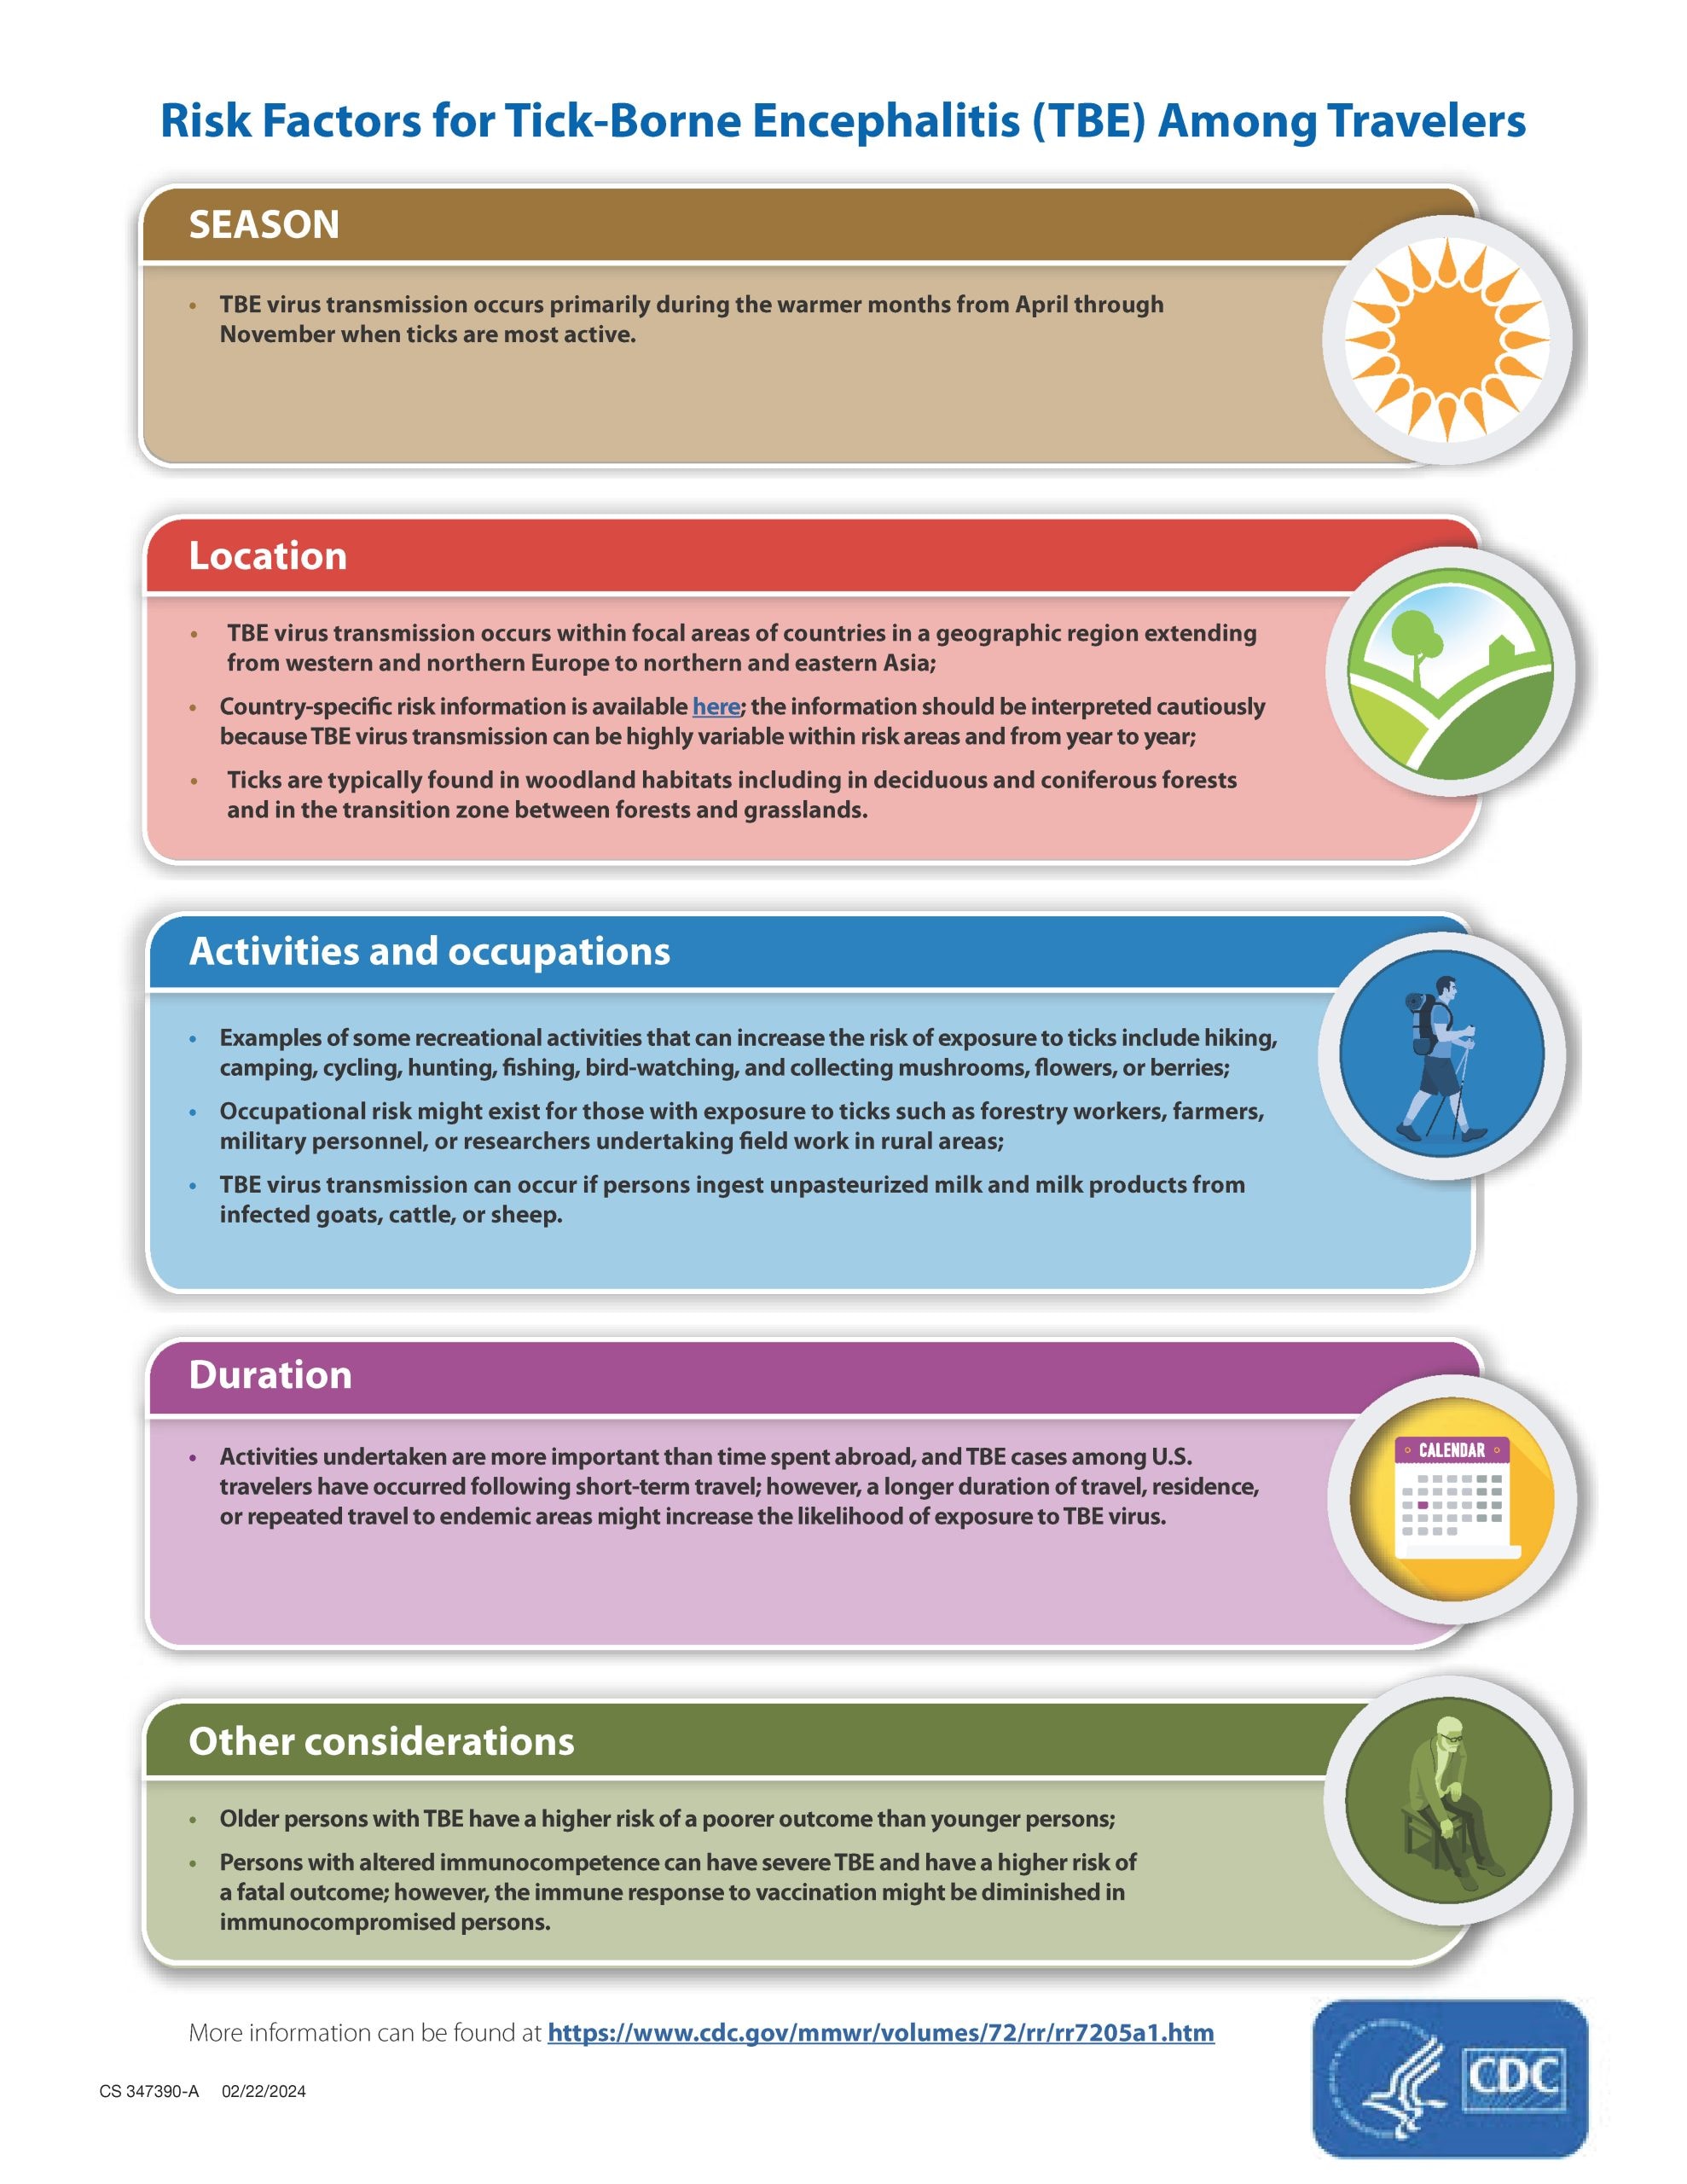 Infographic describing risk factors for TBE among travelers.